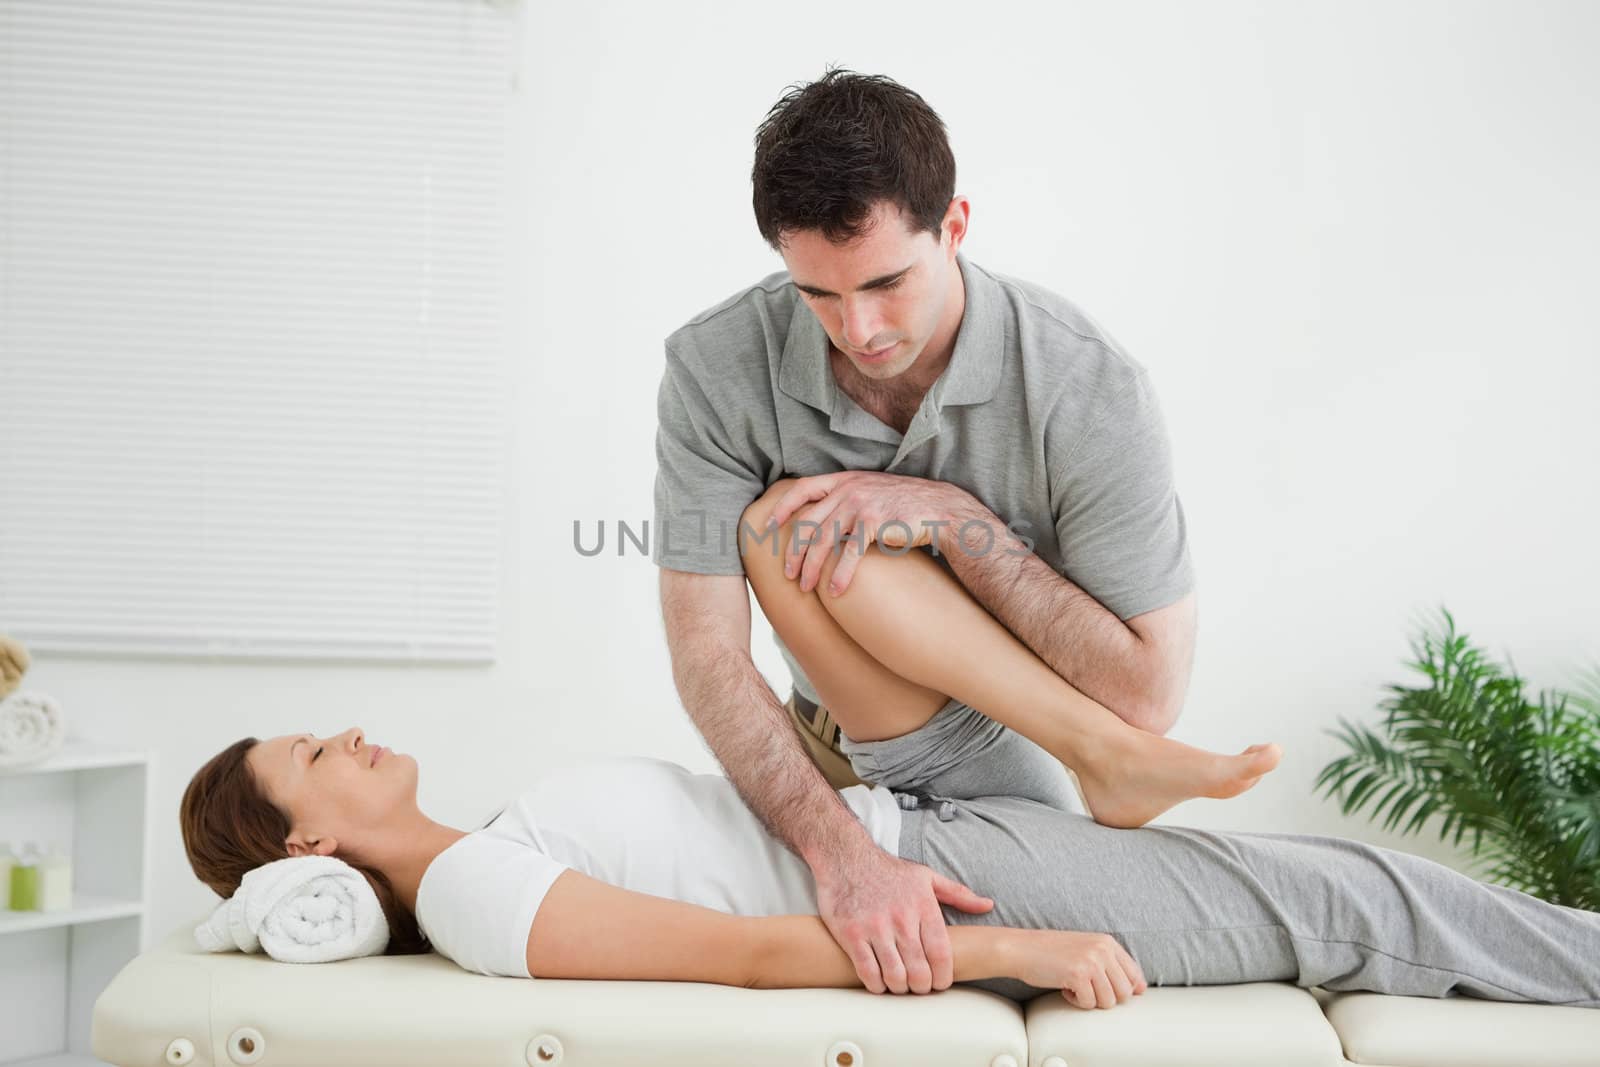 Brown-haired woman being stretched by a man by Wavebreakmedia